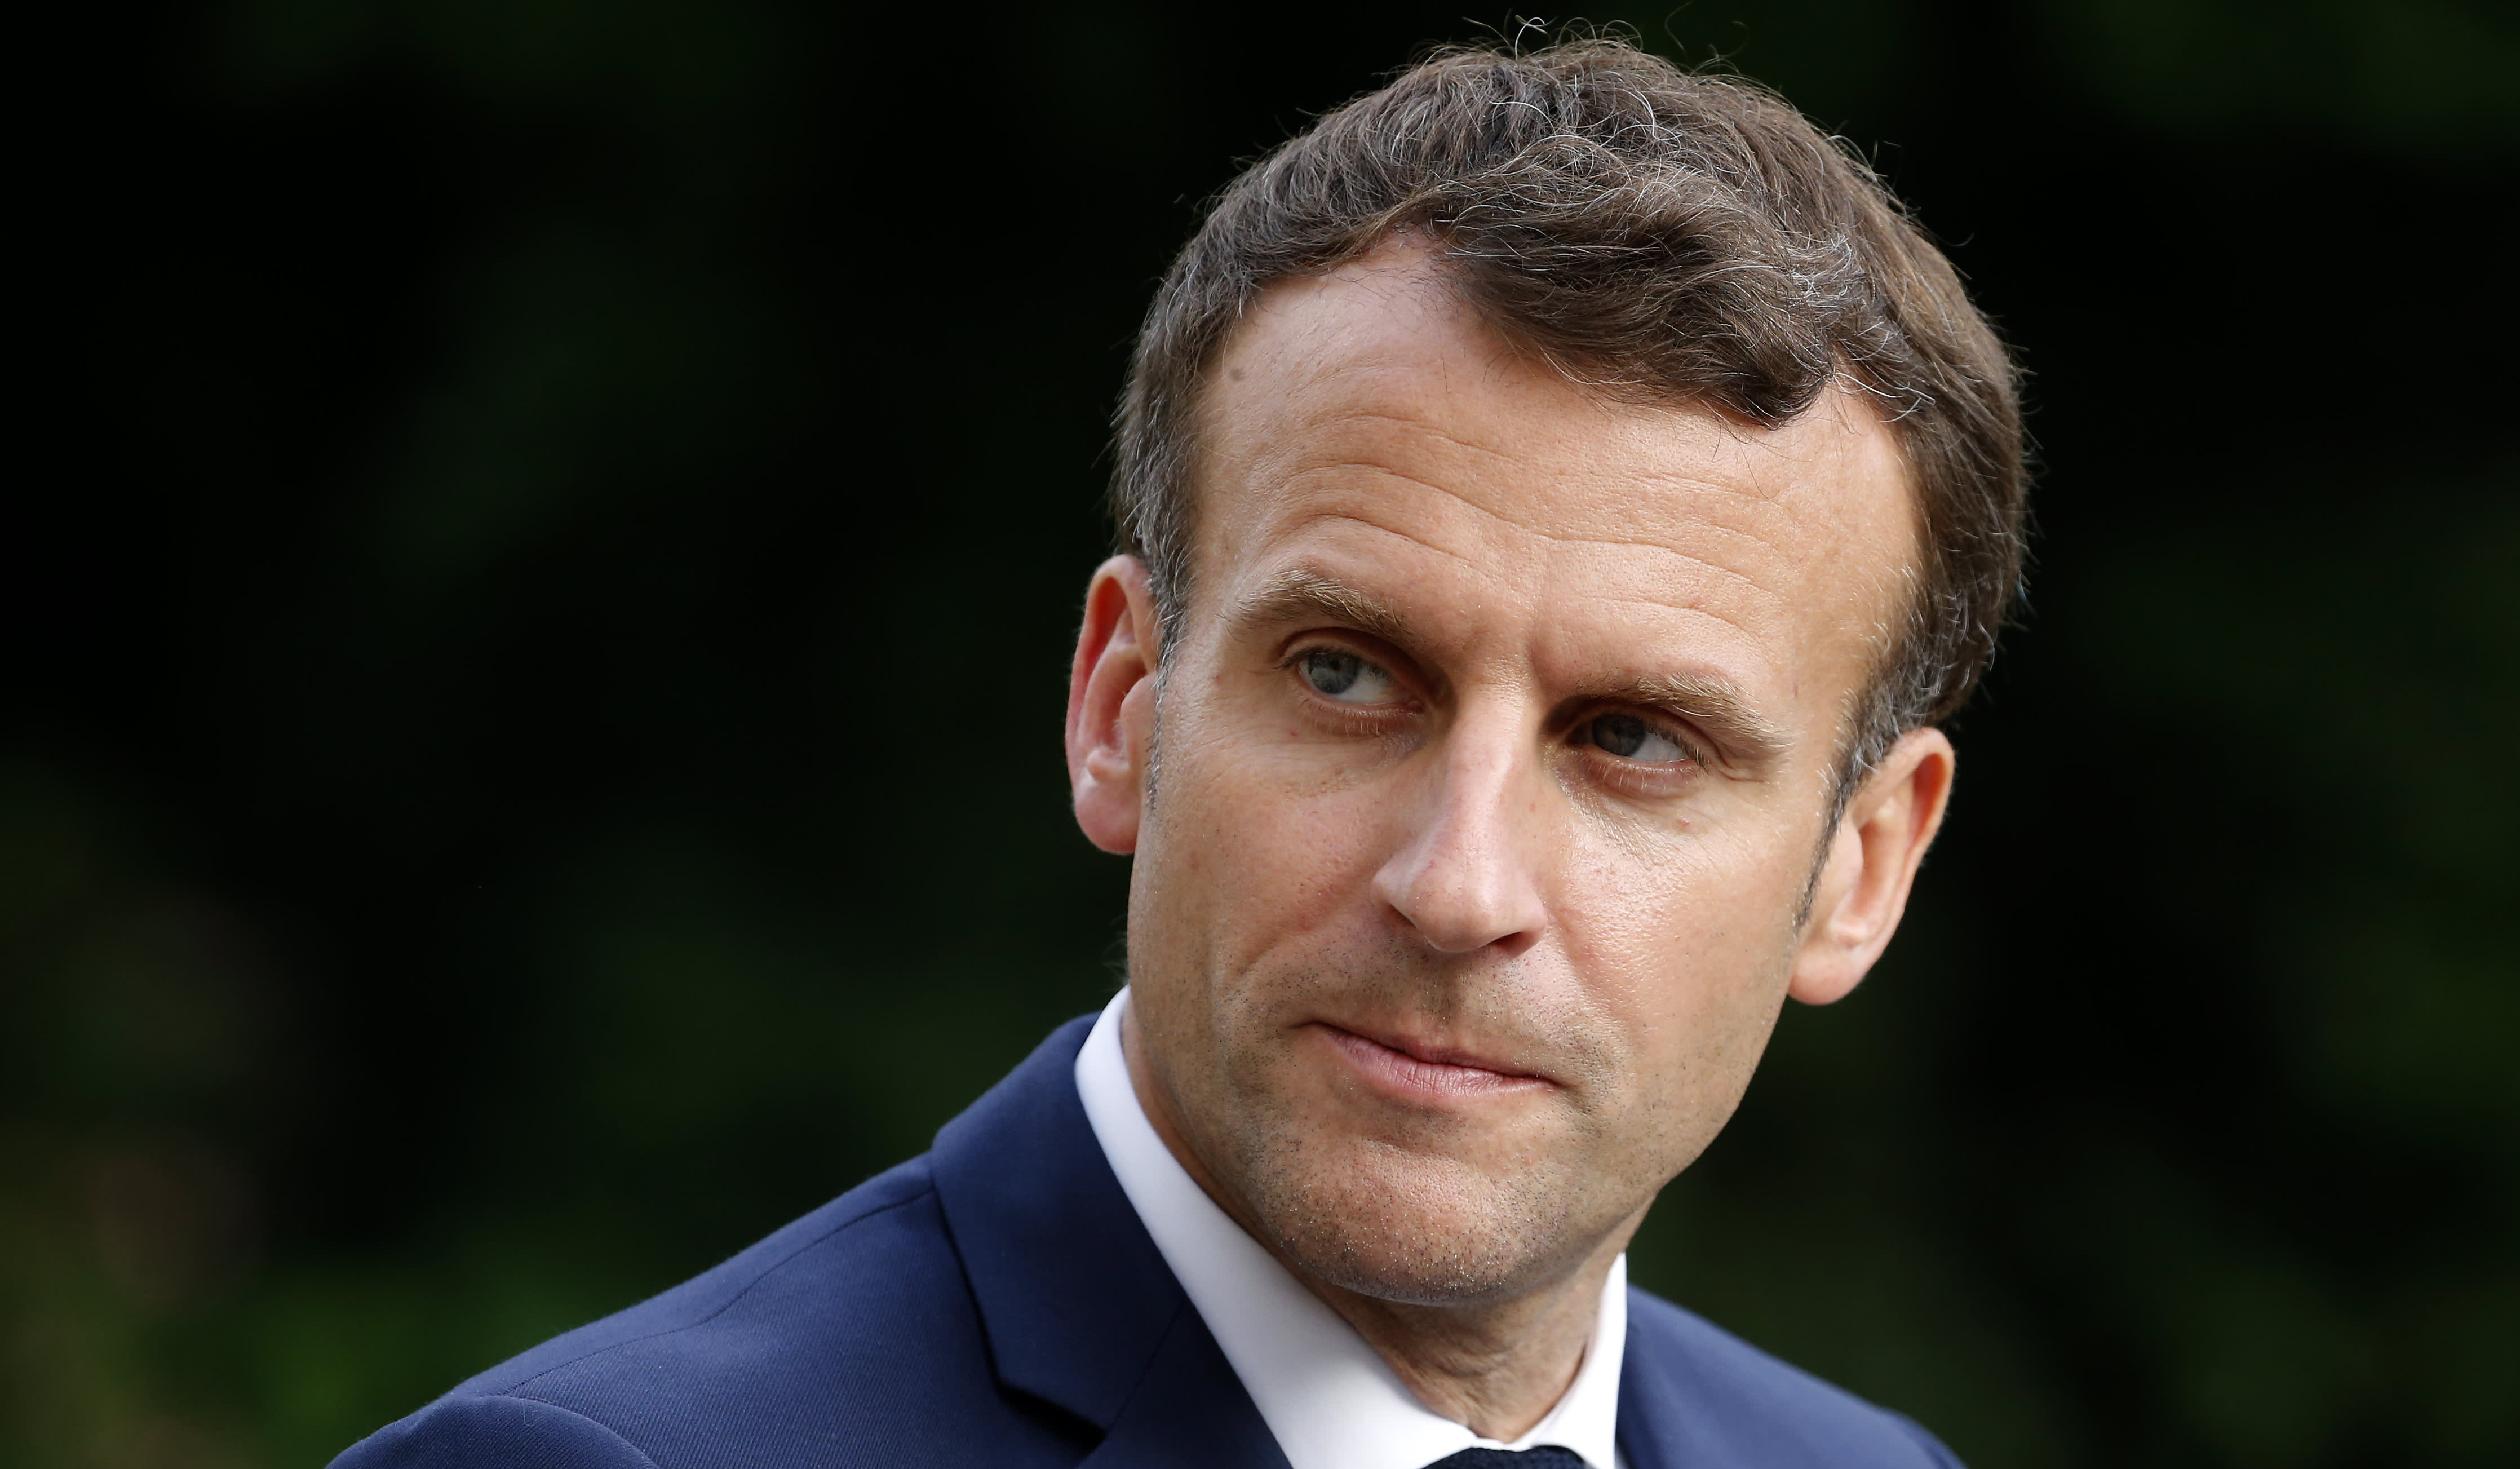 France's Macron says will travel to Ukraine only if trip is